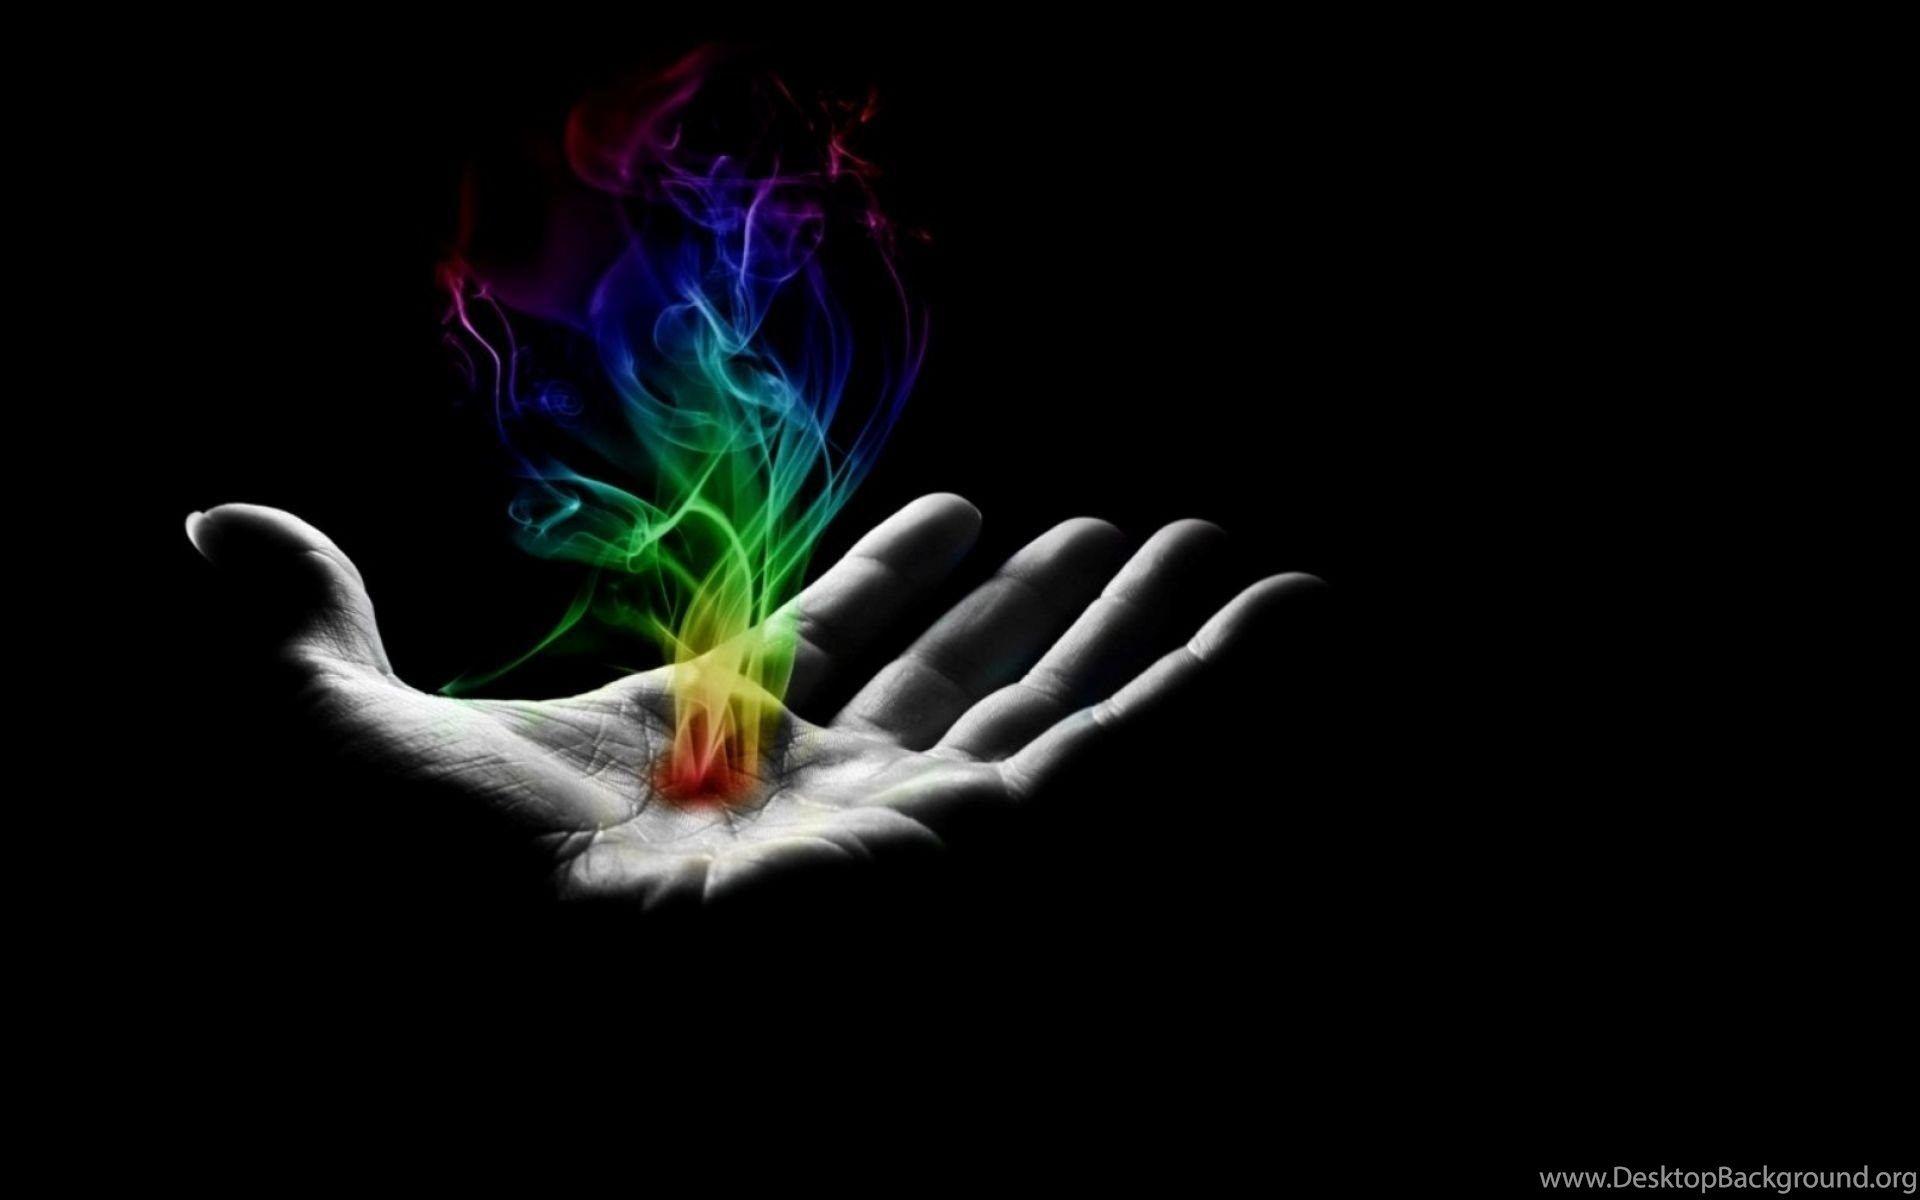 3D Magical Hand With Color Smoke Wallpaper Desktop Background